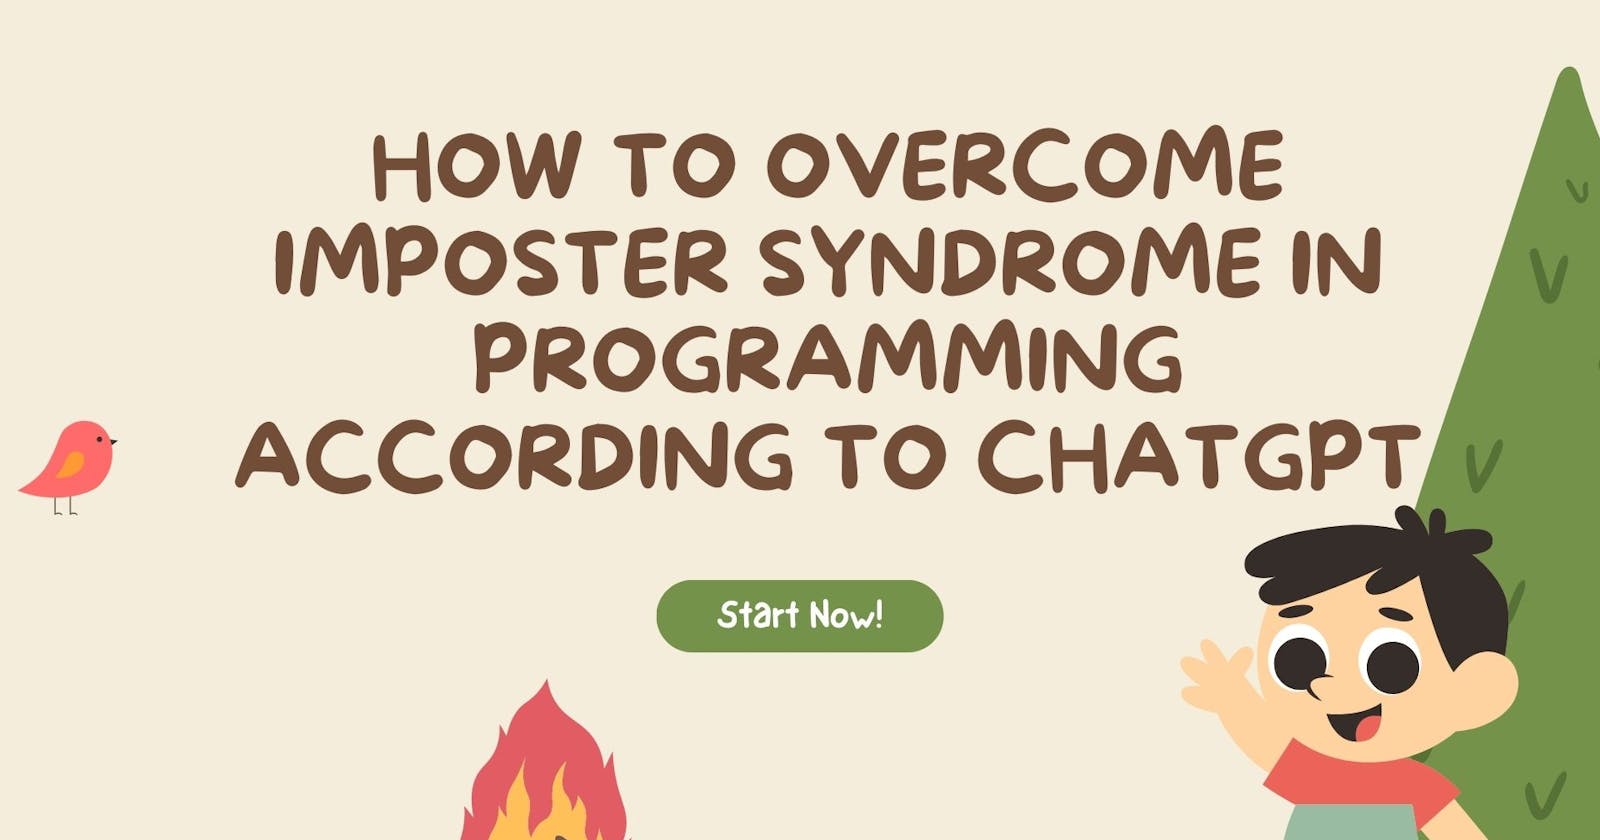 How to overcome imposter syndrome in programming according to chatGPT